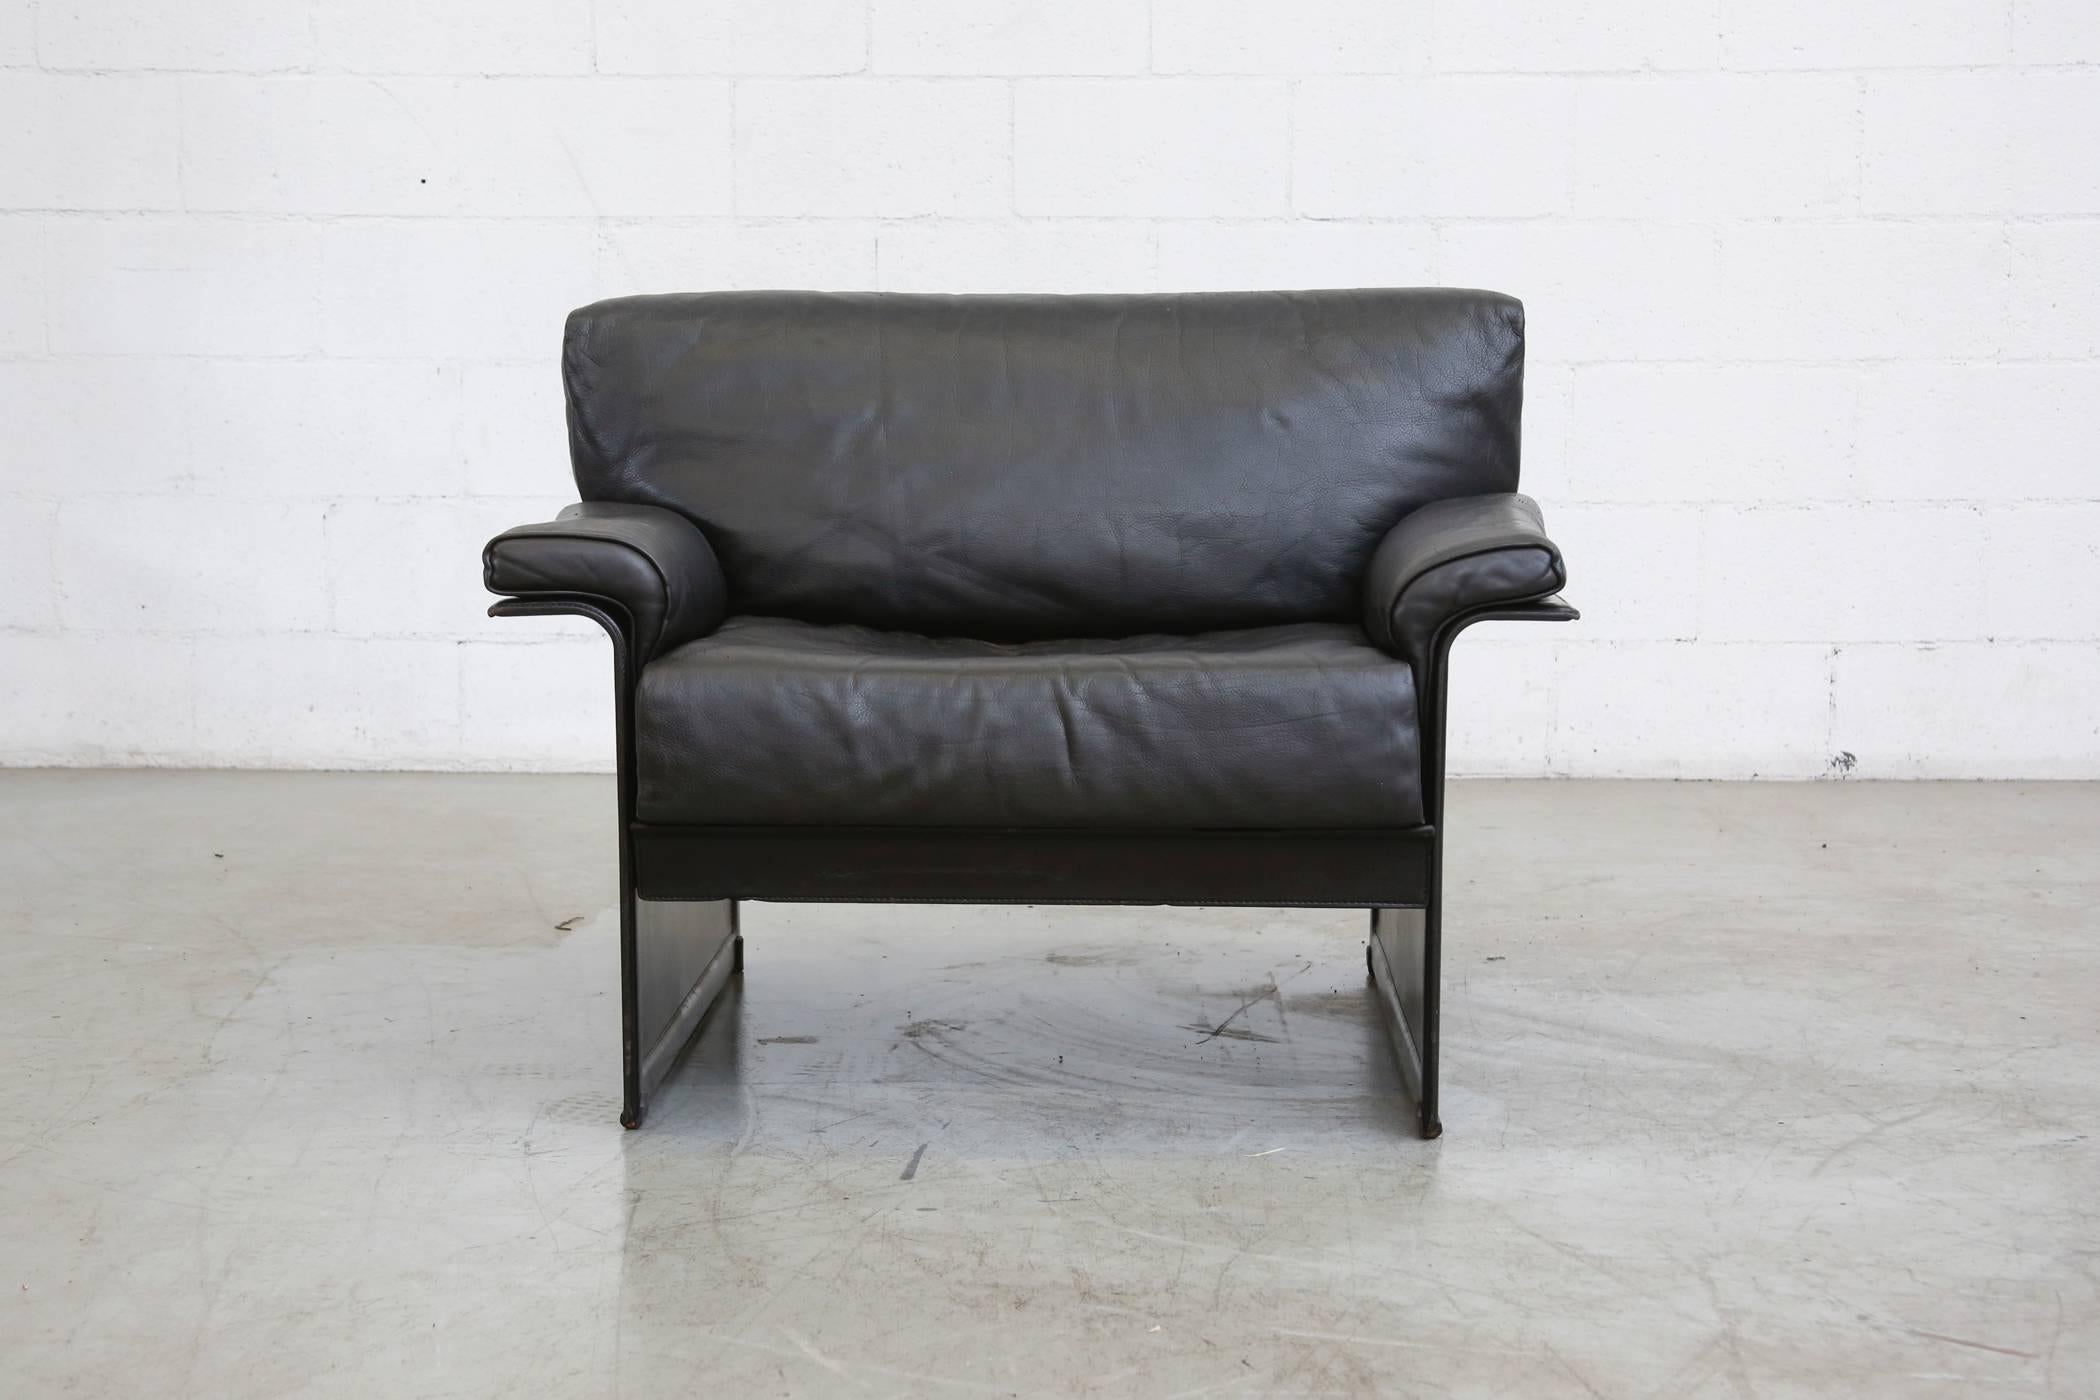 Cool stealth Italian black leather lounge chair by Tito Agnoli for MatteoGrassi. Original condition, visible signs of wear consistent with its age and usage.